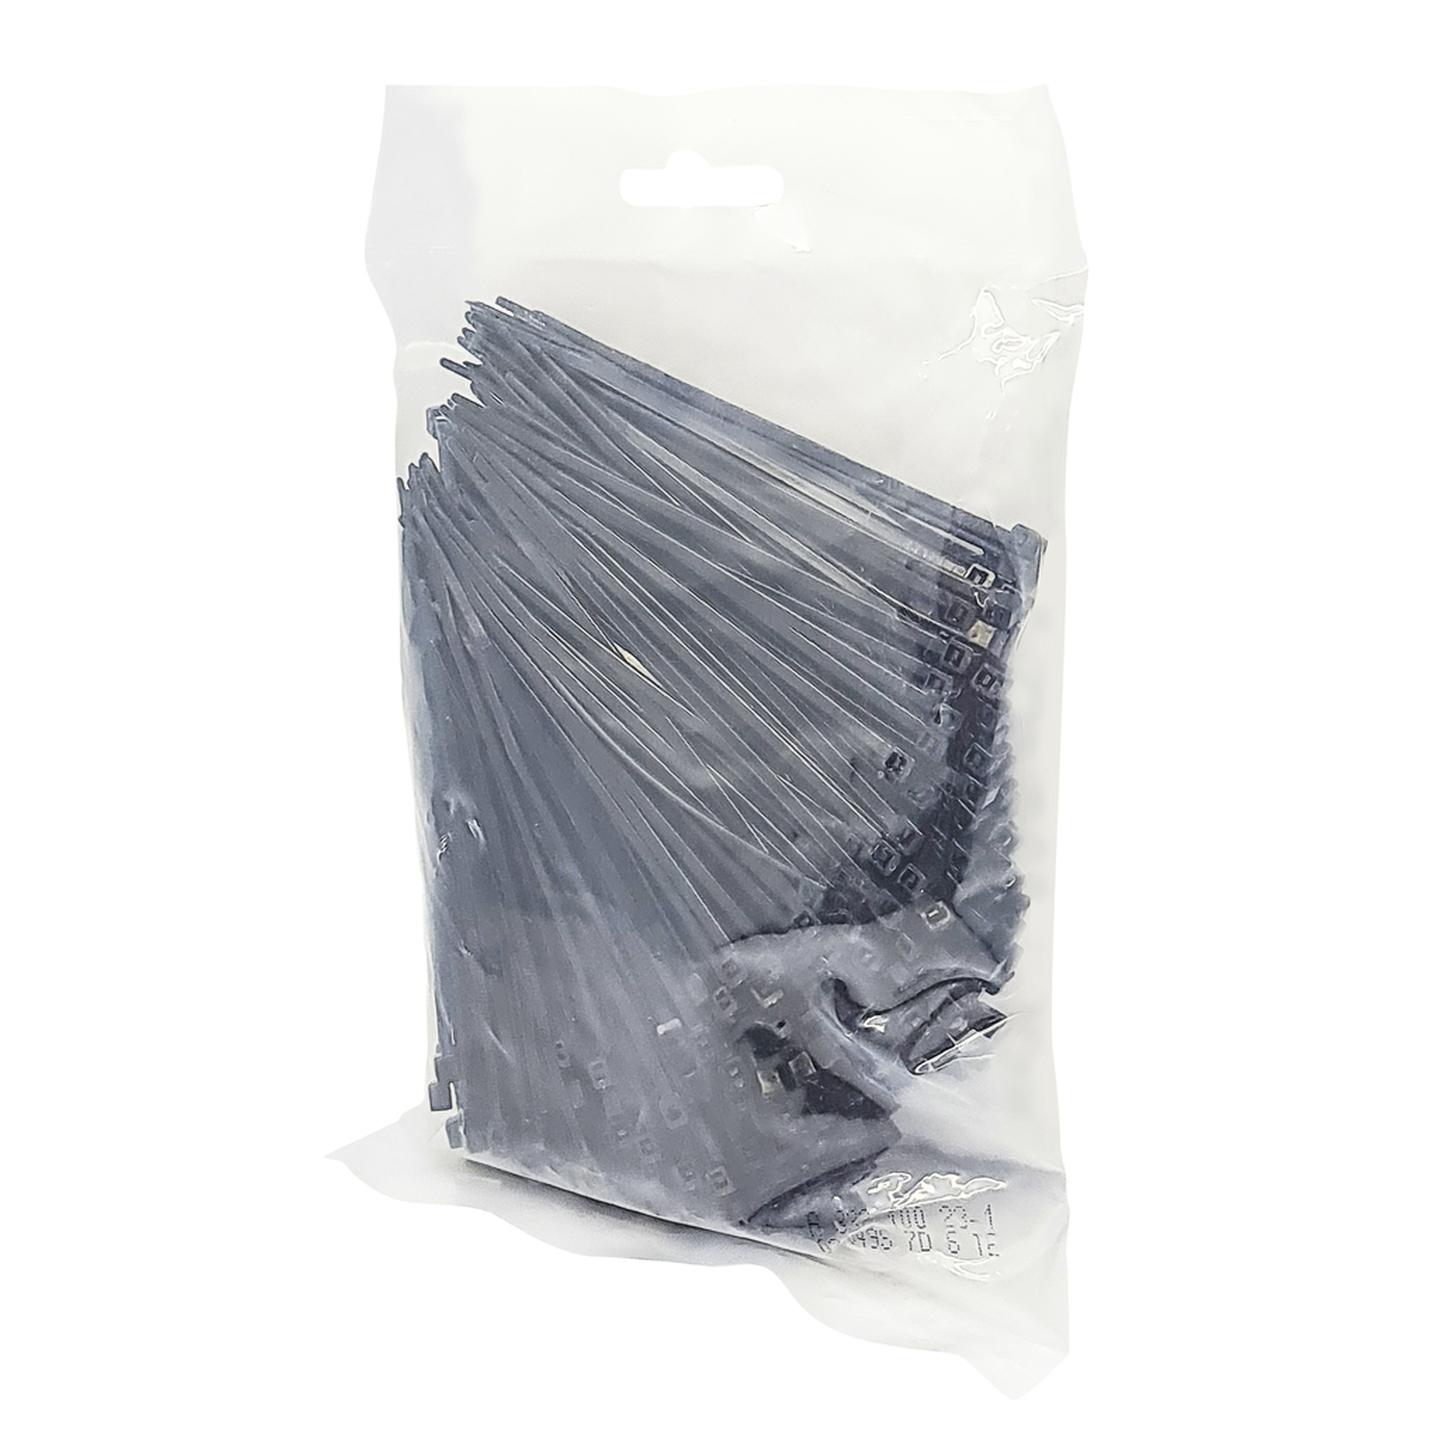 100mm Black Cable Ties - Pack of 500